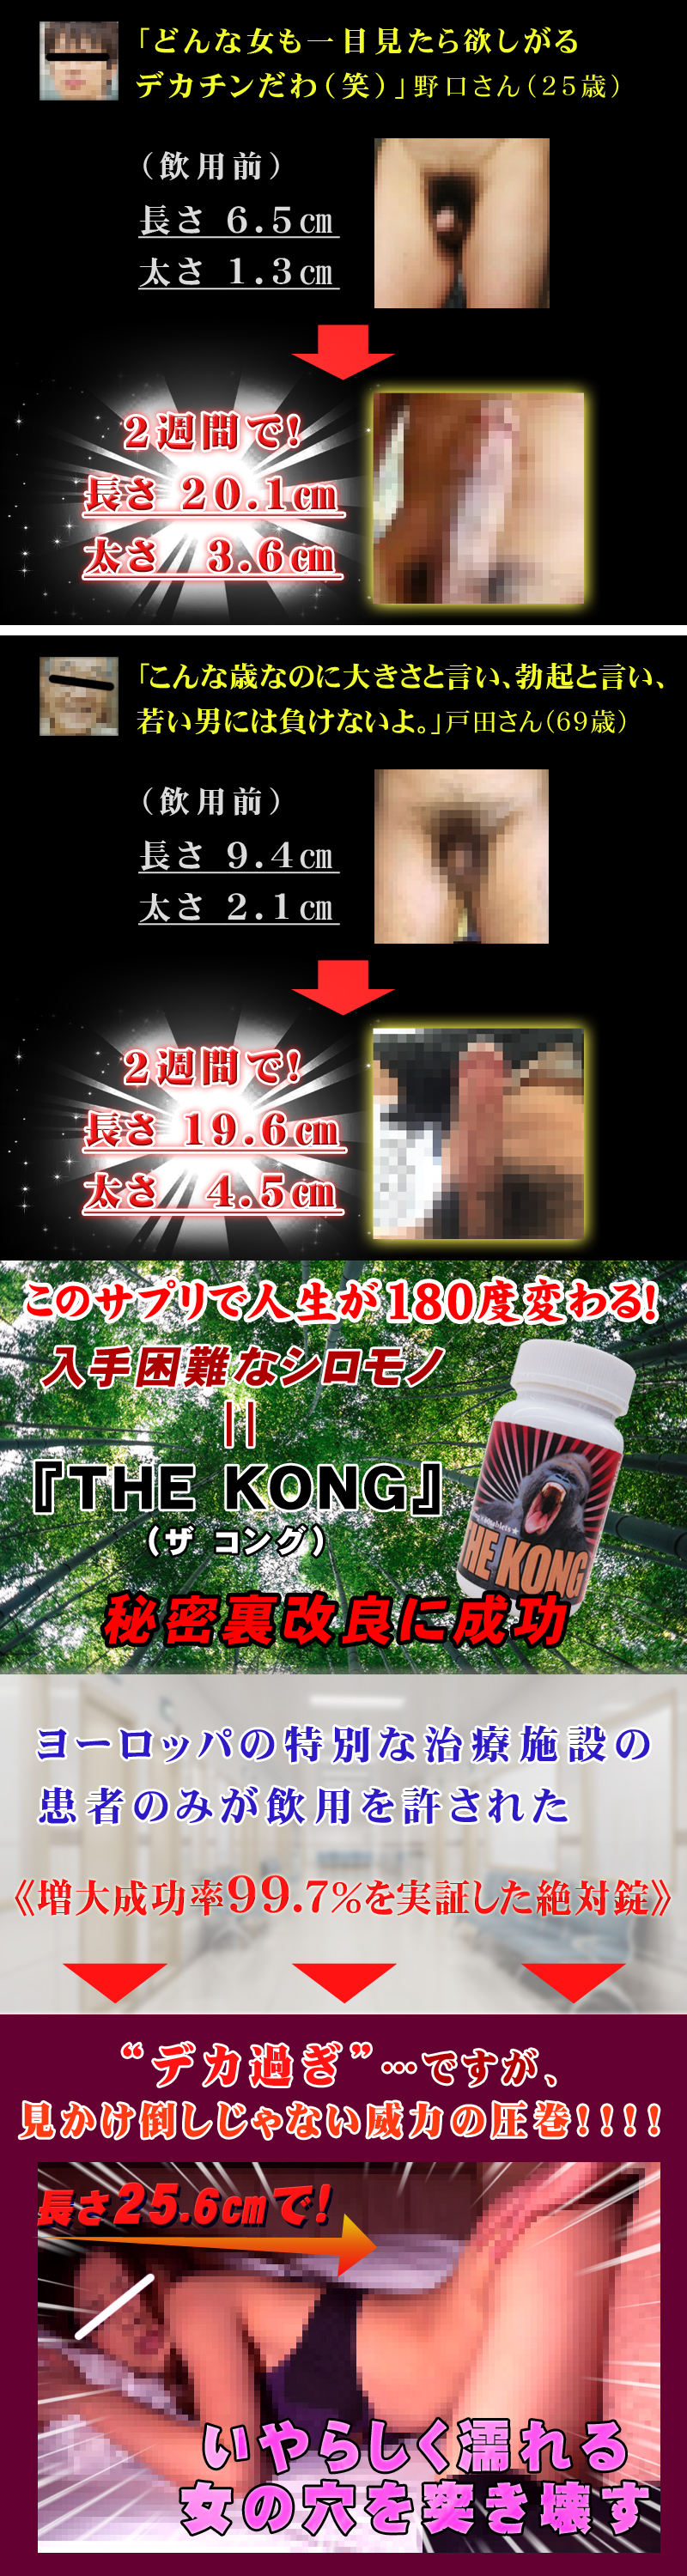 THE KONG(コング)